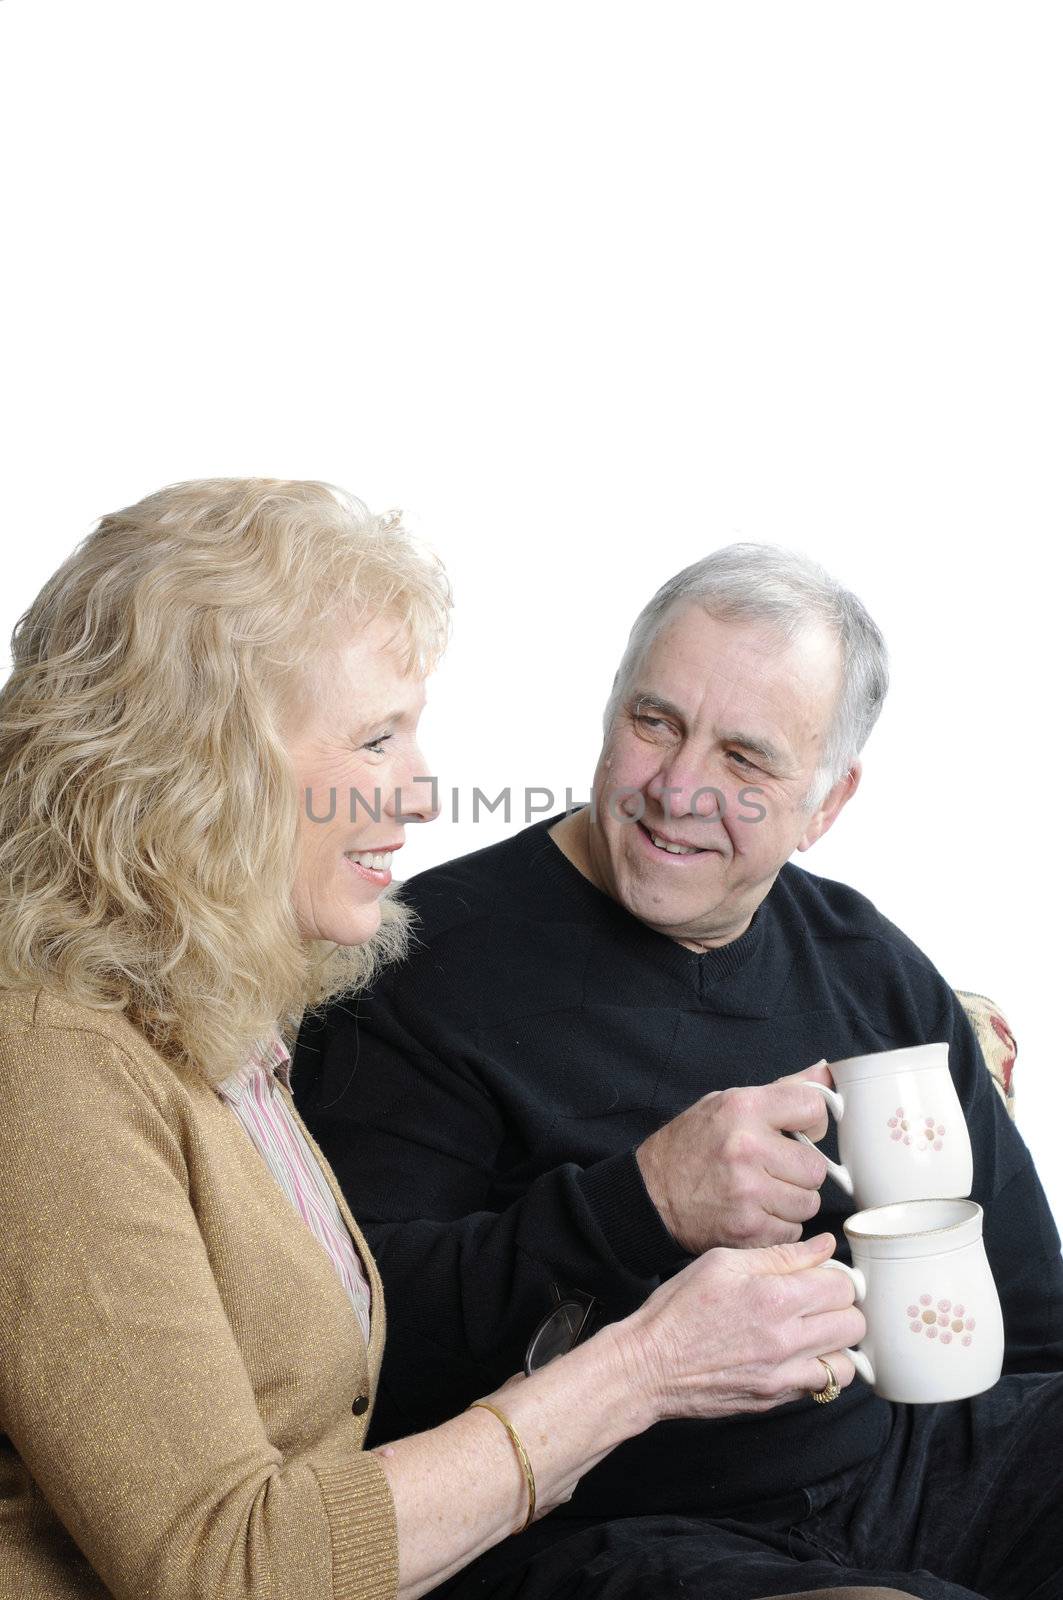 Older enjoying a cup of coffee together by jeffbanke